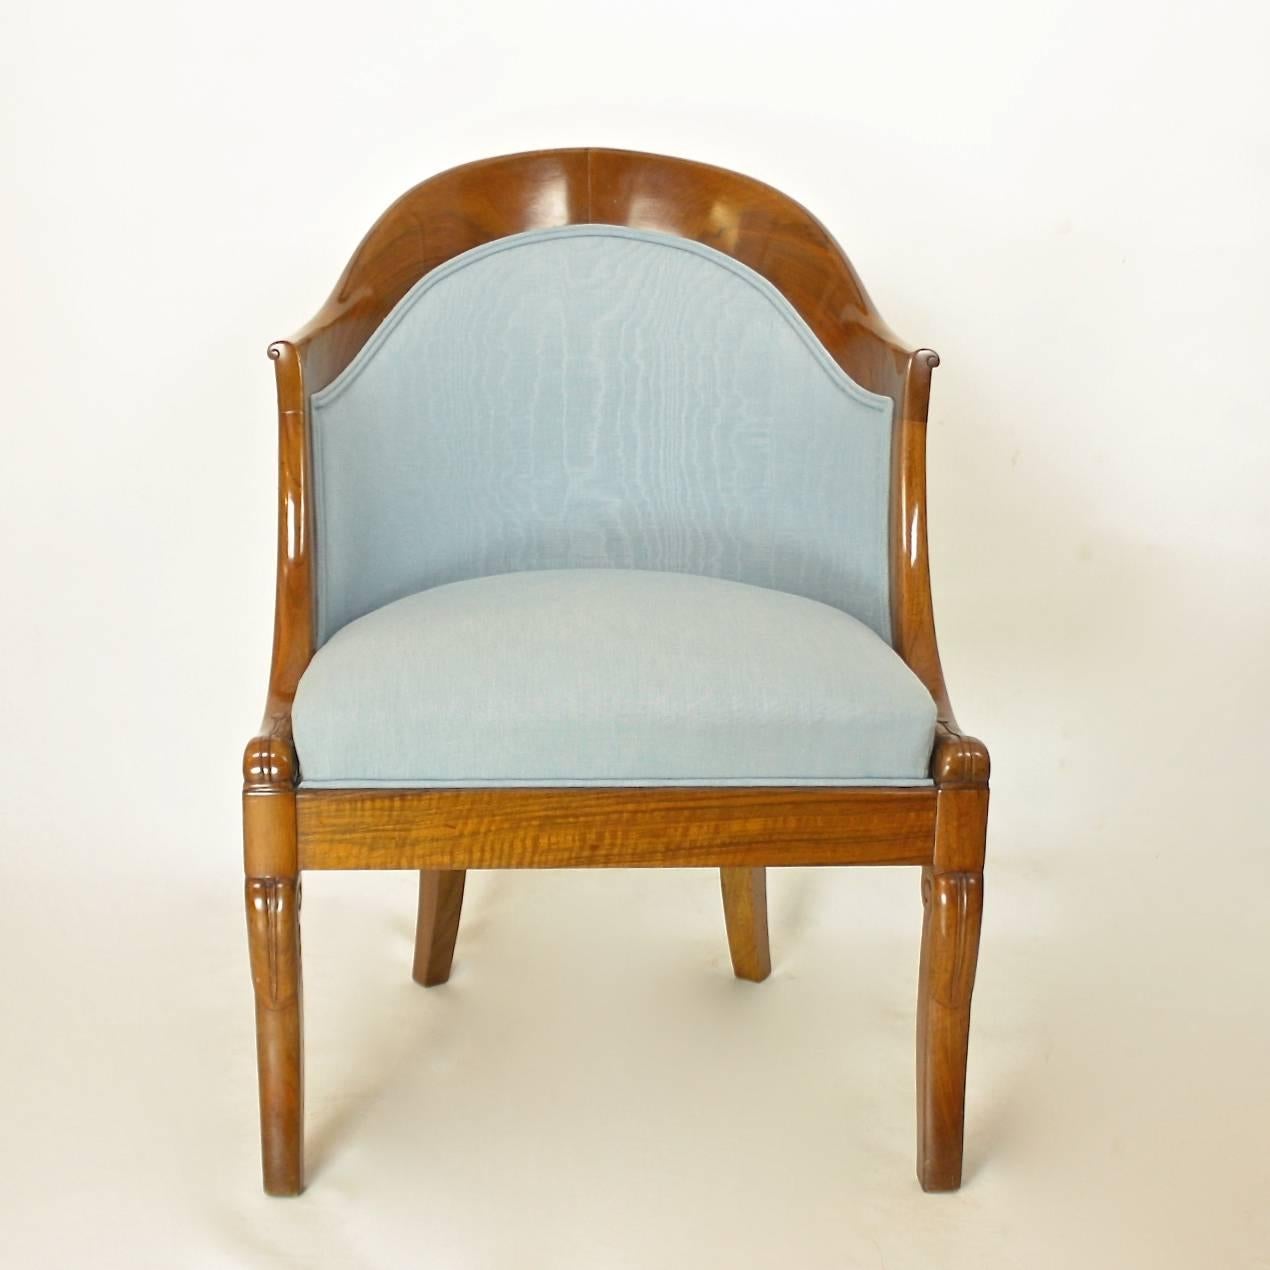 A pair of early 19th century bergère chairs with moulded arched back, upholstery continuous over seat and back. Rails and legs made of beautifully grained walnut, with scrolled arm terminals, cabriole front legs and raked back legs.
The walnut frame